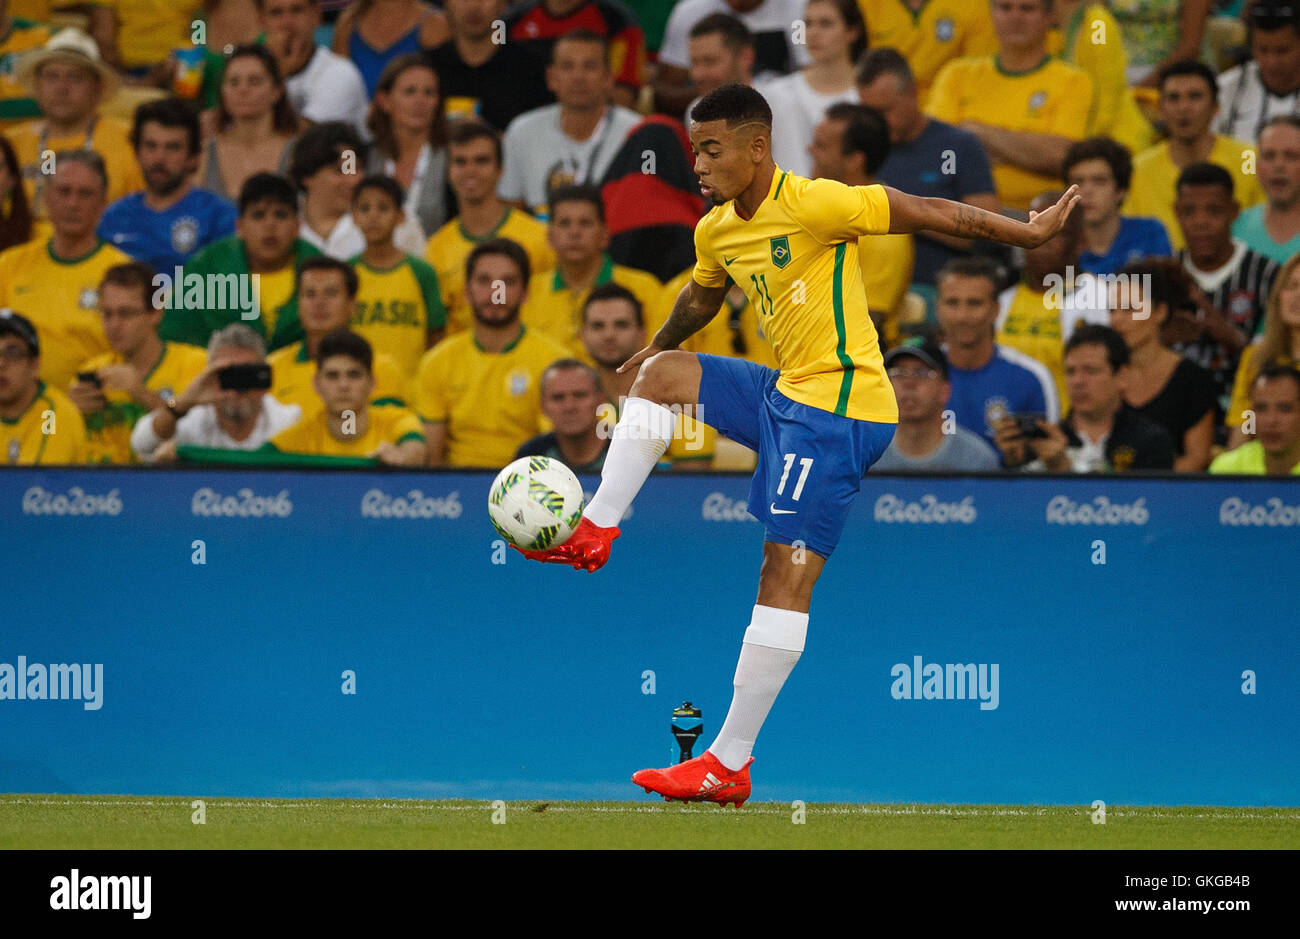 Rio De Janeiro, Brazil. 20th Aug, 2016. Gabriel Jesus of Brazil during the match between Brazil vs Germany valid for the race for football gold in Rio Olympics 2016 held at Maracanã Stadium. NOT AVAILABLE FOR LICENSING IN CHINA (Photo: Marcelo Machado de Melo/Fotoarena) Credit:  Foto Arena LTDA/Alamy Live News Stock Photo